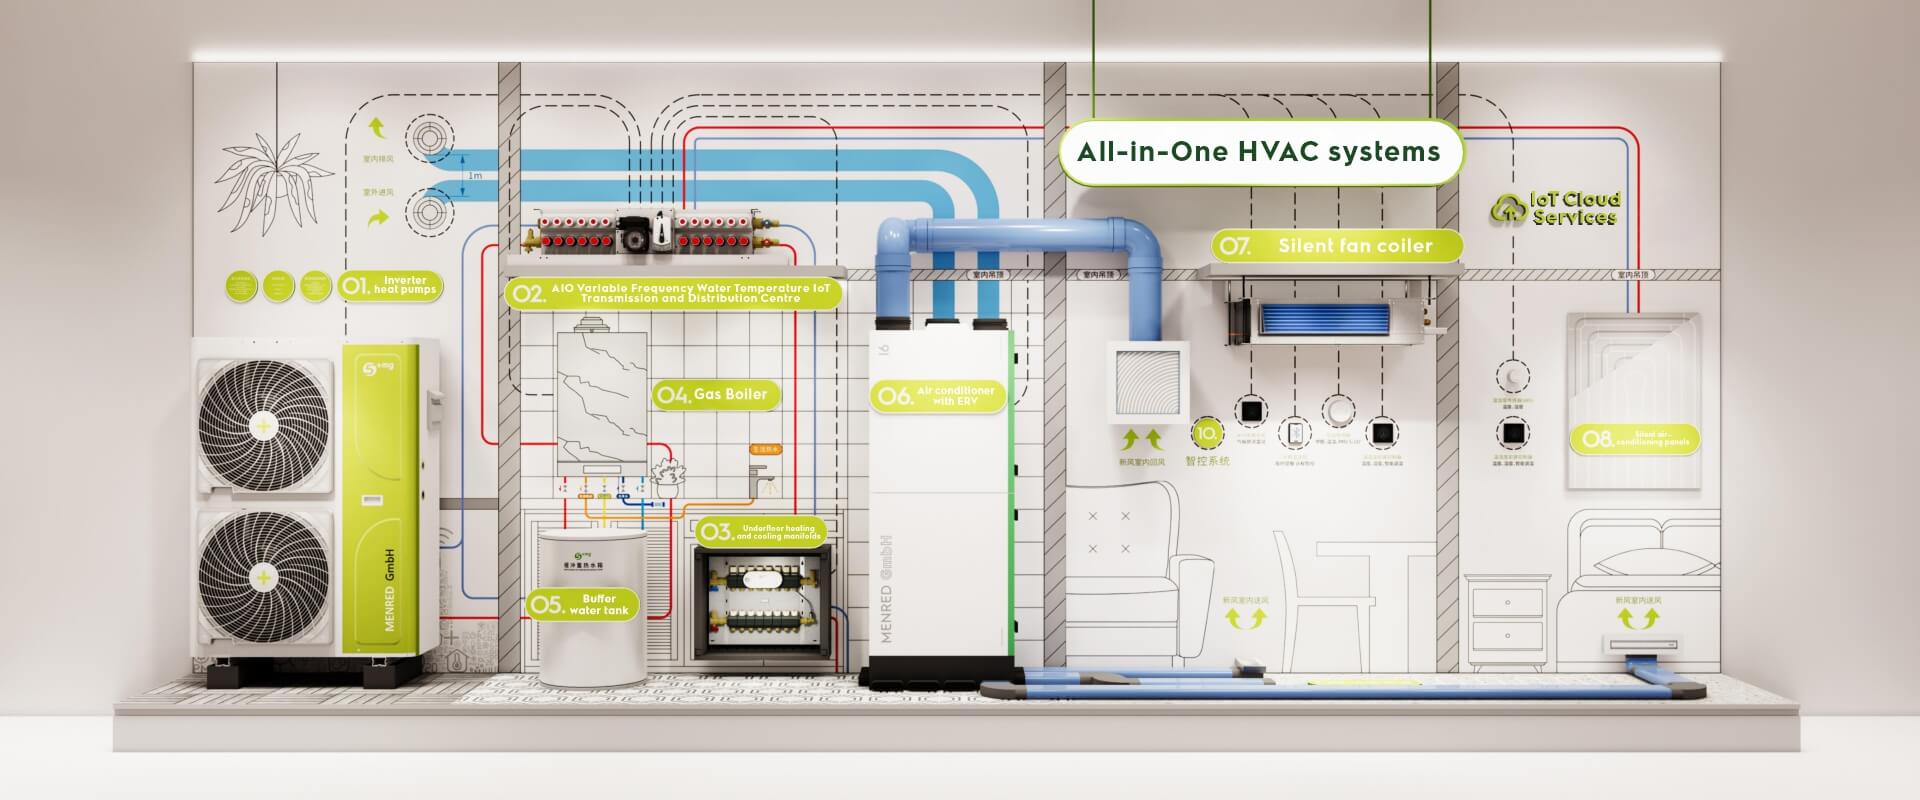 All-in-One HVAC system